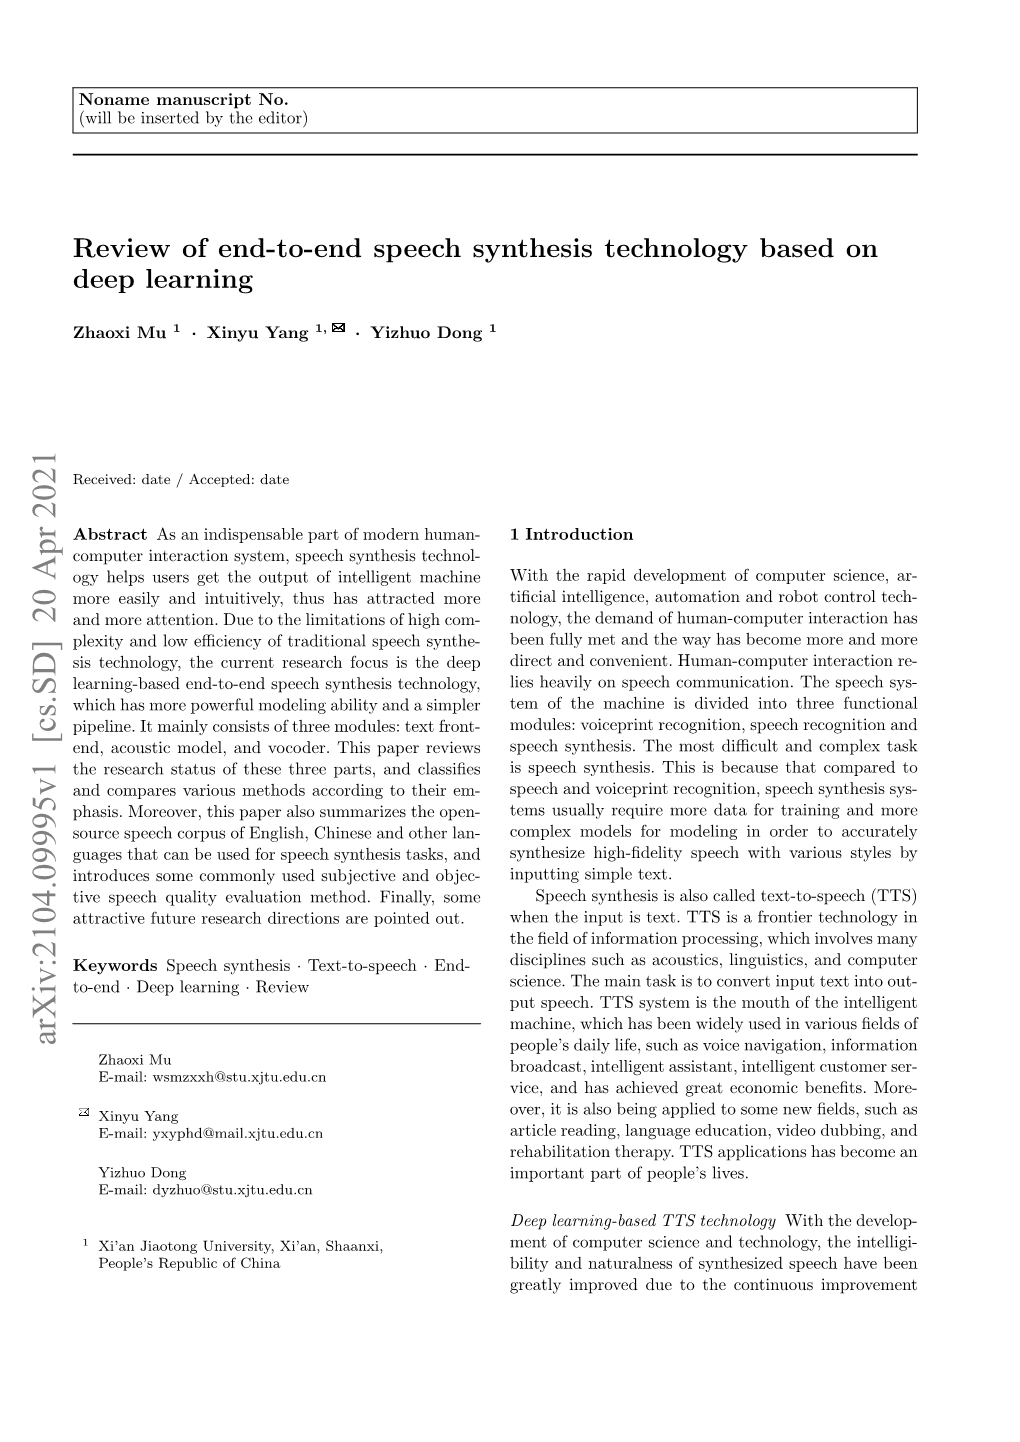 Review of End-To-End Speech Synthesis Technology Based on Deep Learning